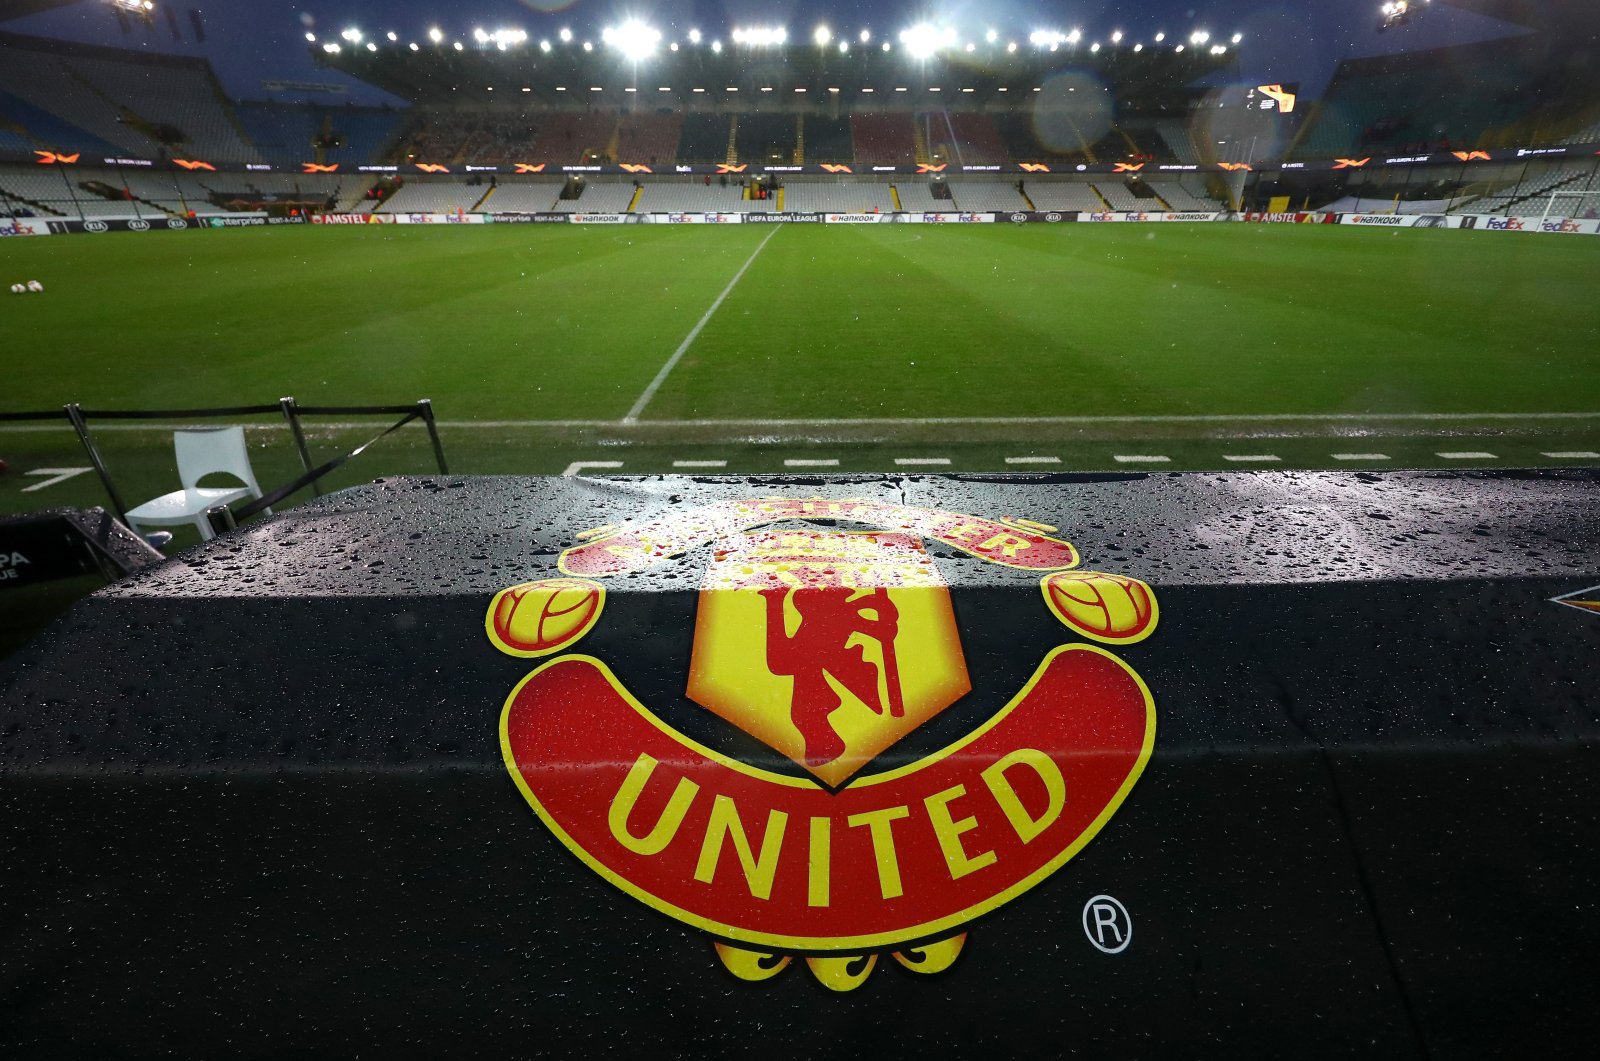 A Manchester United logo is seen inside the stadium prior to the UEFA Europa League round of 32 first leg match between Club Brugge and Manchester United at Jan Breydel Stadium, Brugge, Belgium, Feb. 20, 2020. (Getty Images Photo)